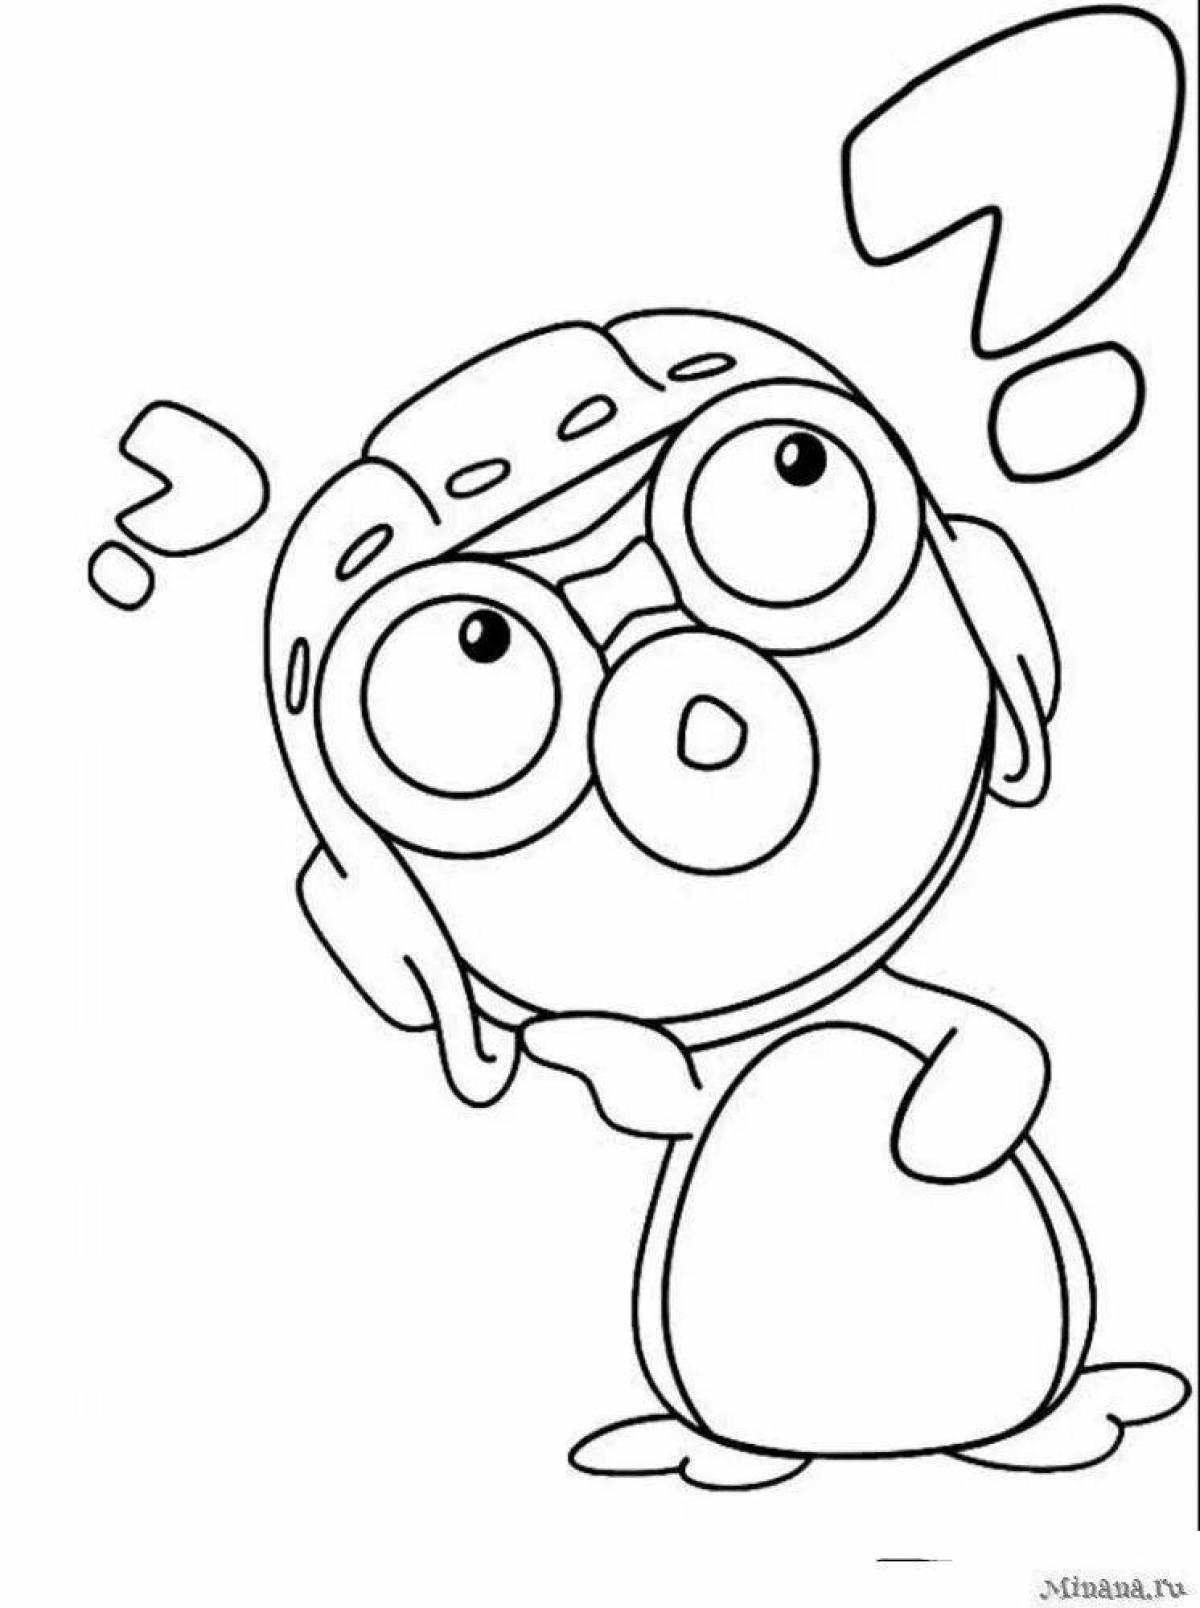 Animated pororo coloring page